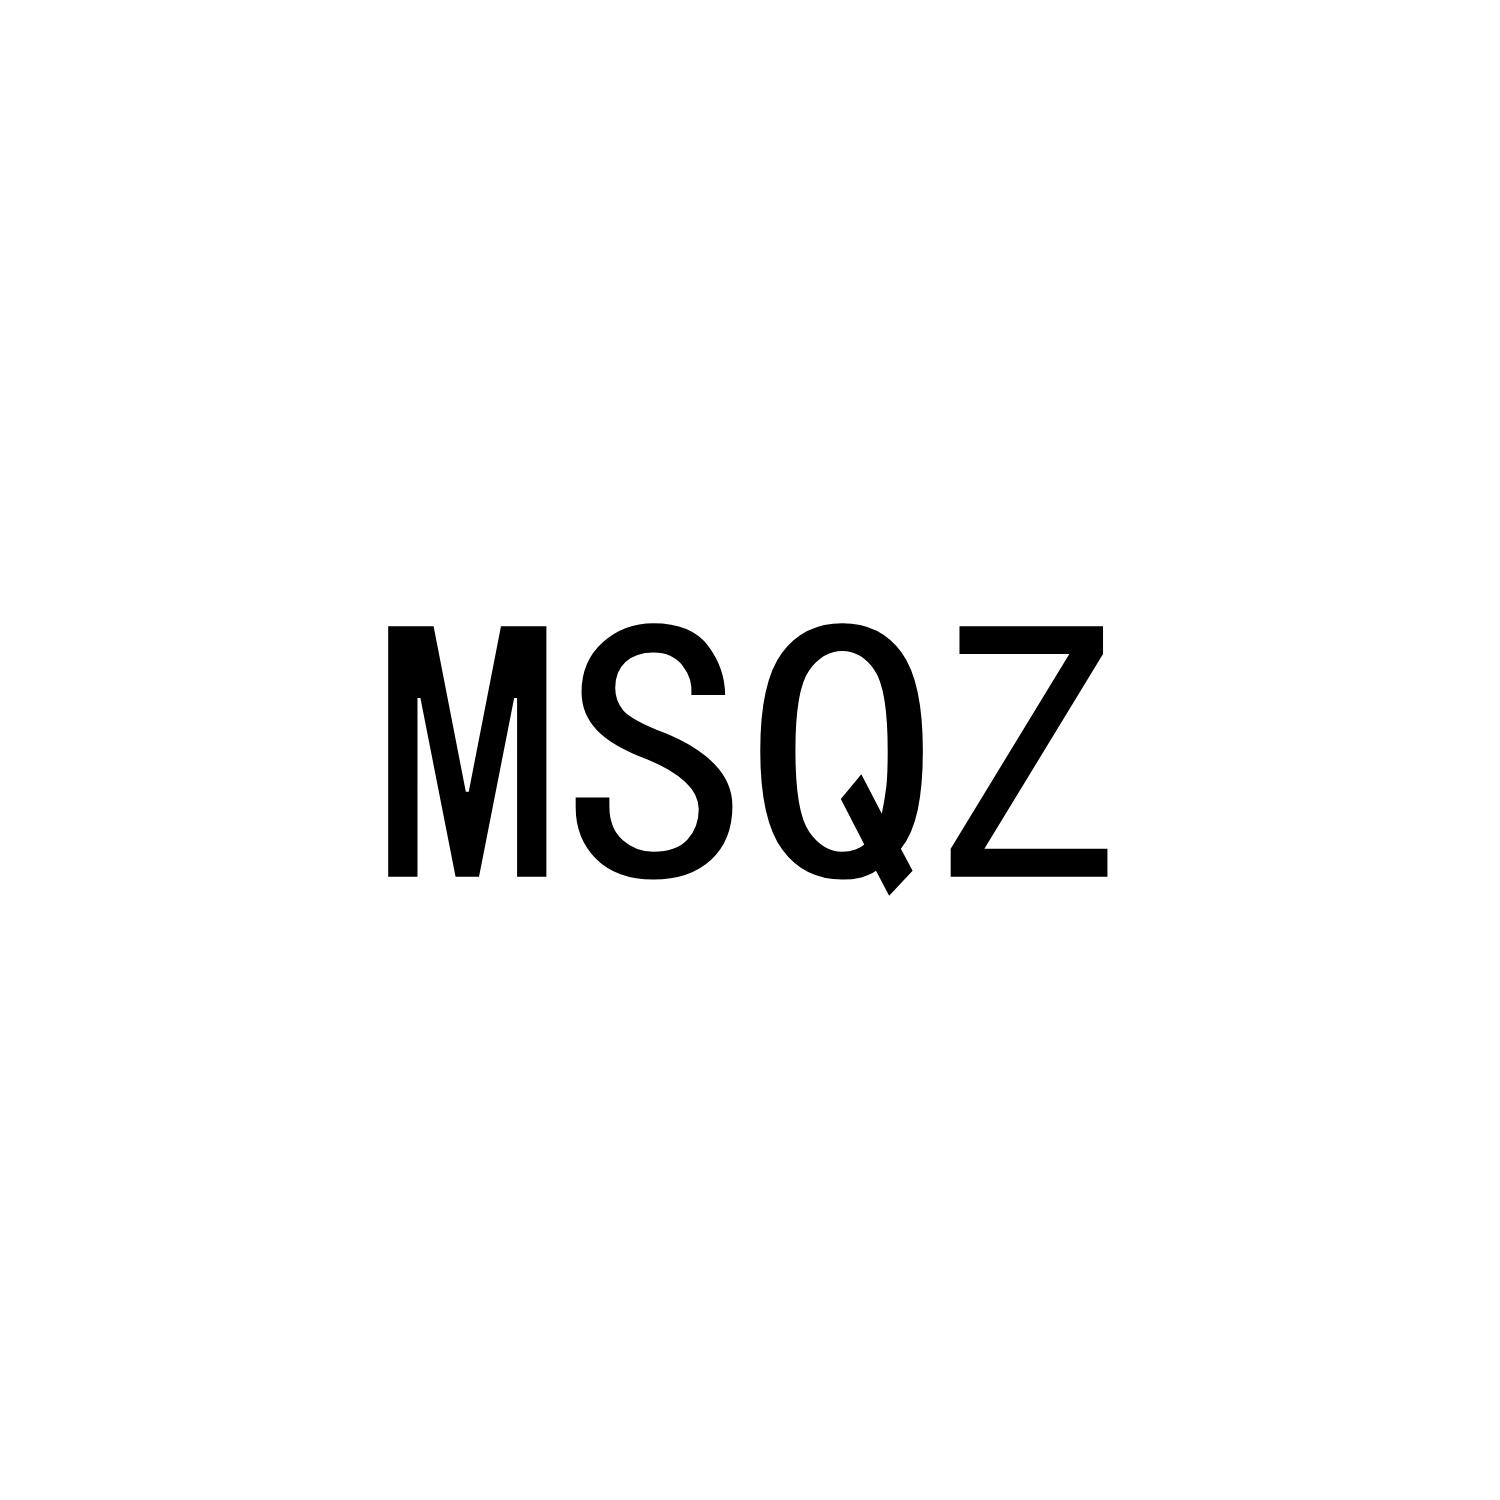 MSQZ